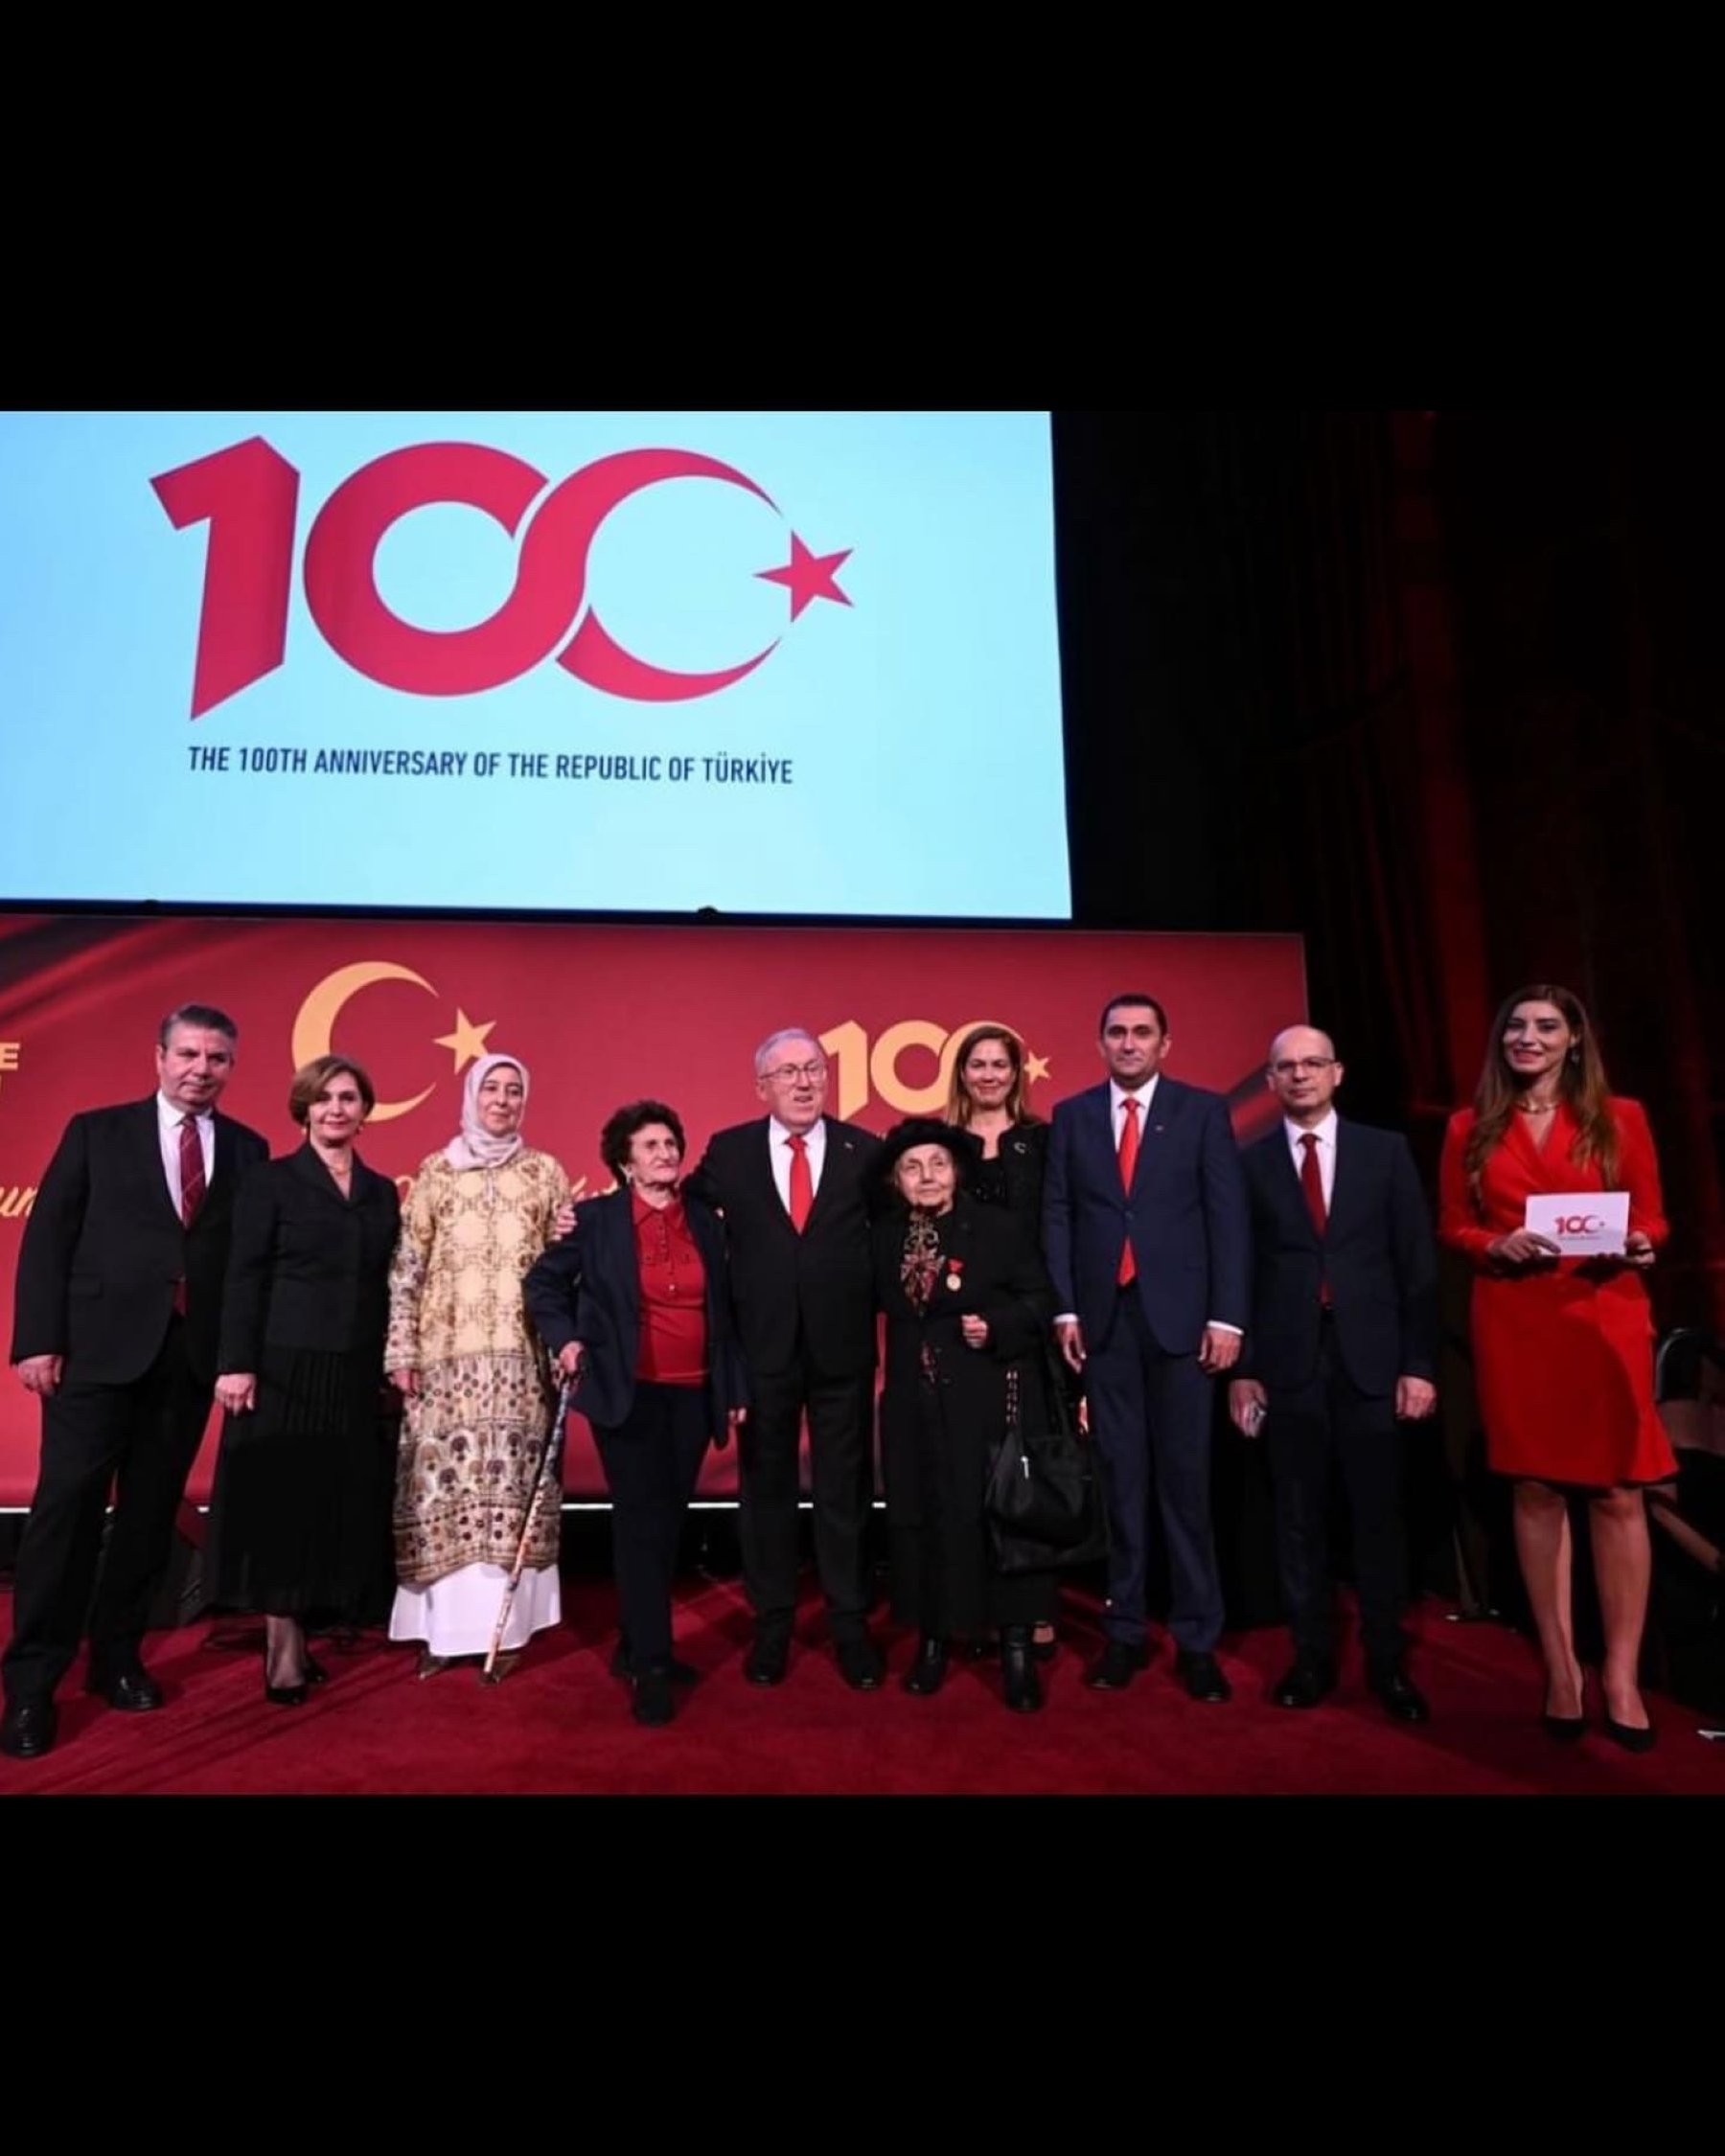 The 100th anniversary of the Republic of Türkiye unfolded at the renowned Cipriani in New York, U.S., Oct. 29, 2023. (Photo by Funda Karayel)